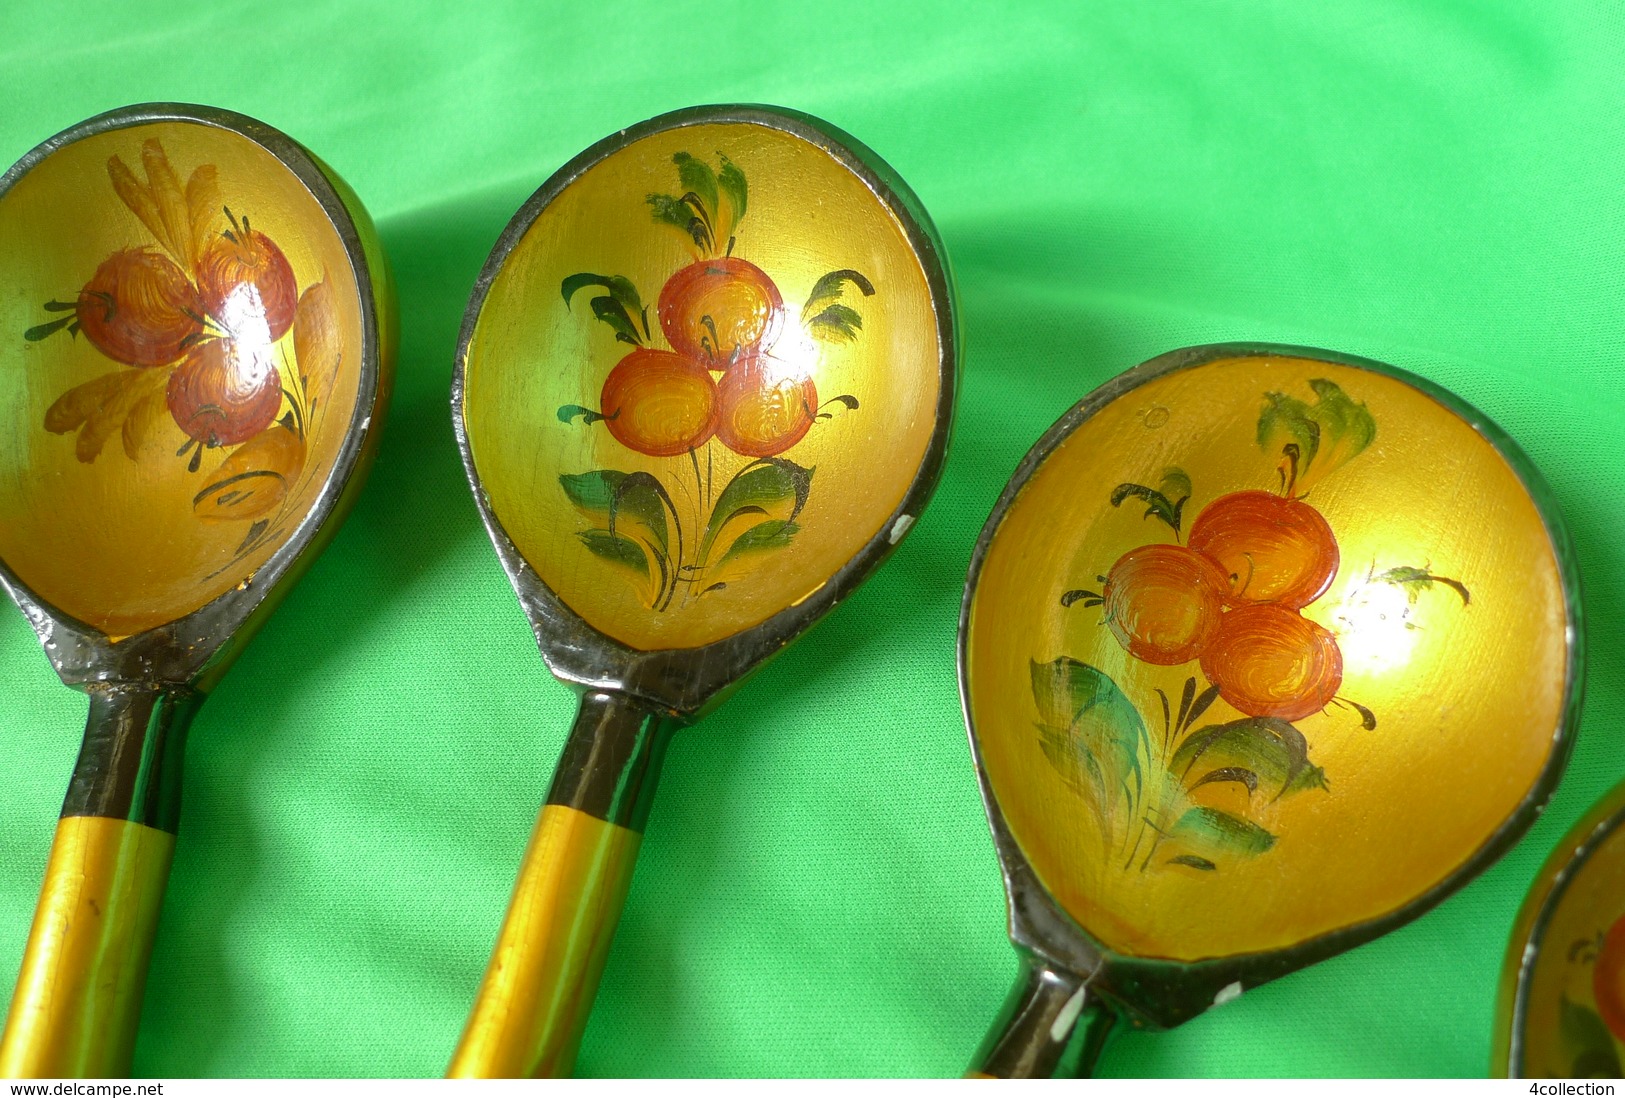 Vintage RUSSIAN Folk Art KHOKHLOMA Hand PAINTED Wooden Spoon 5psc Soviet Cutlery - Cuillers